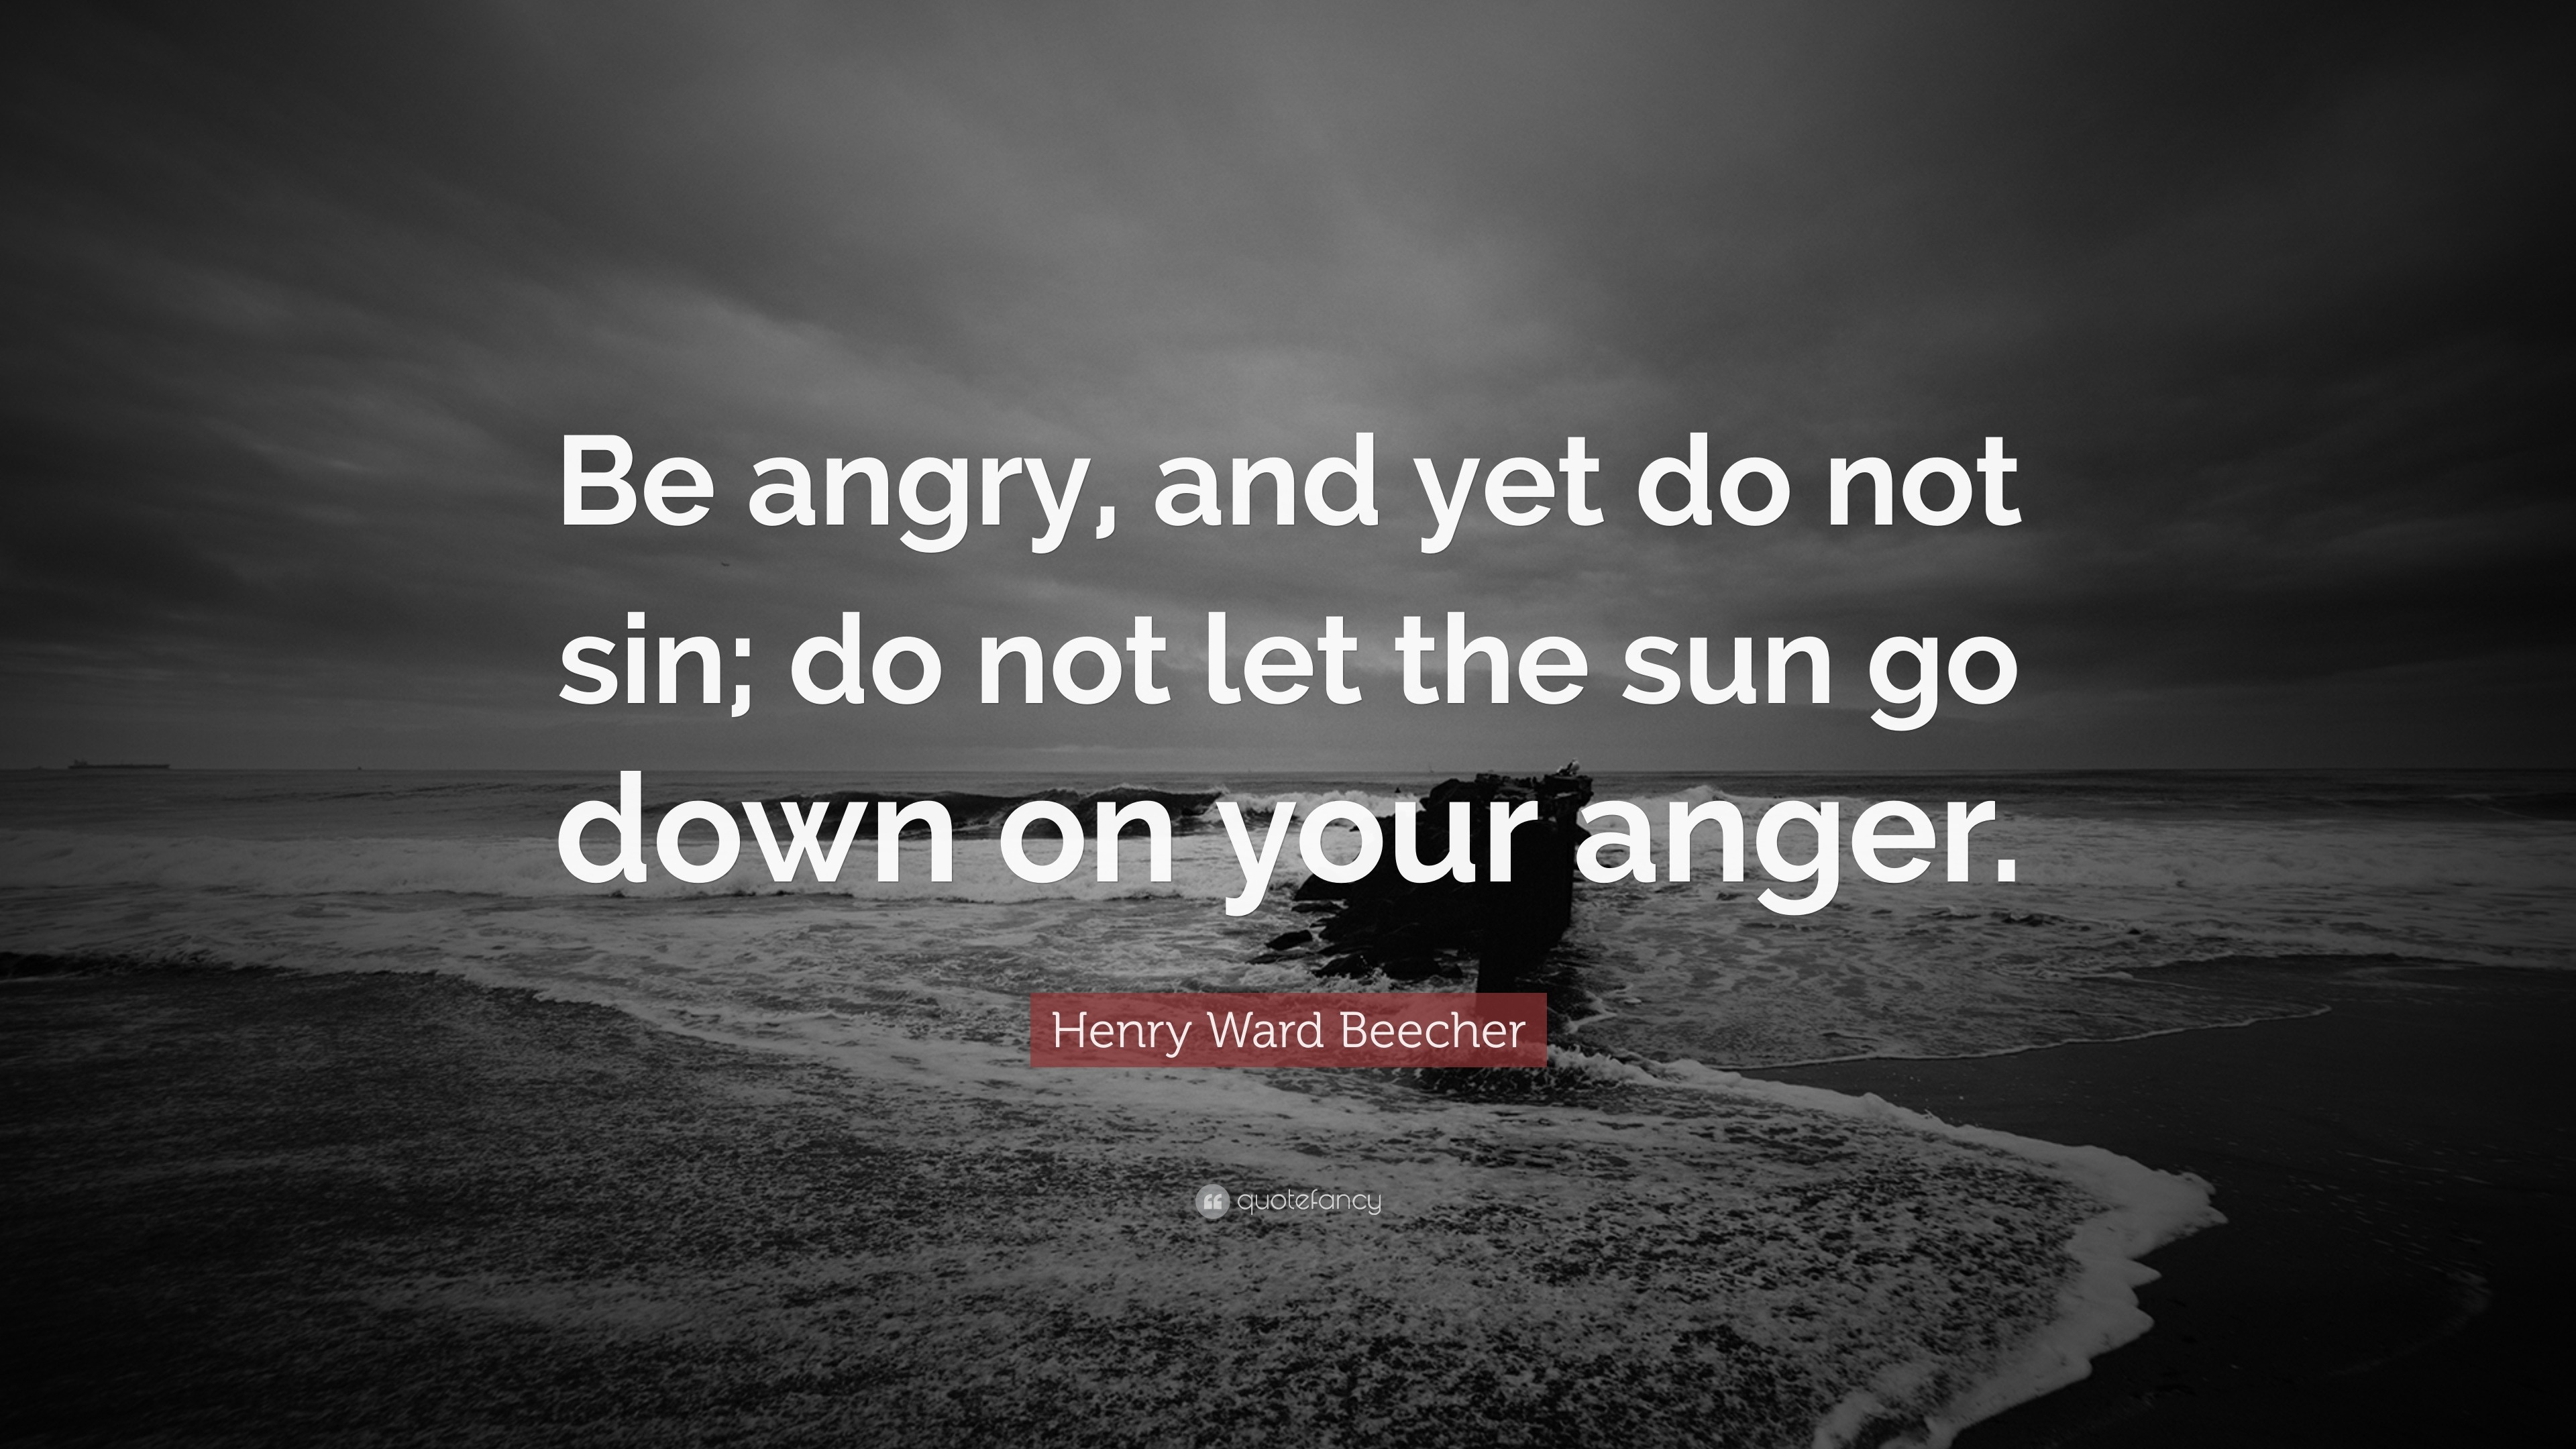 Be angry, and yet do not sin; do not let the sun go down on your anger. 